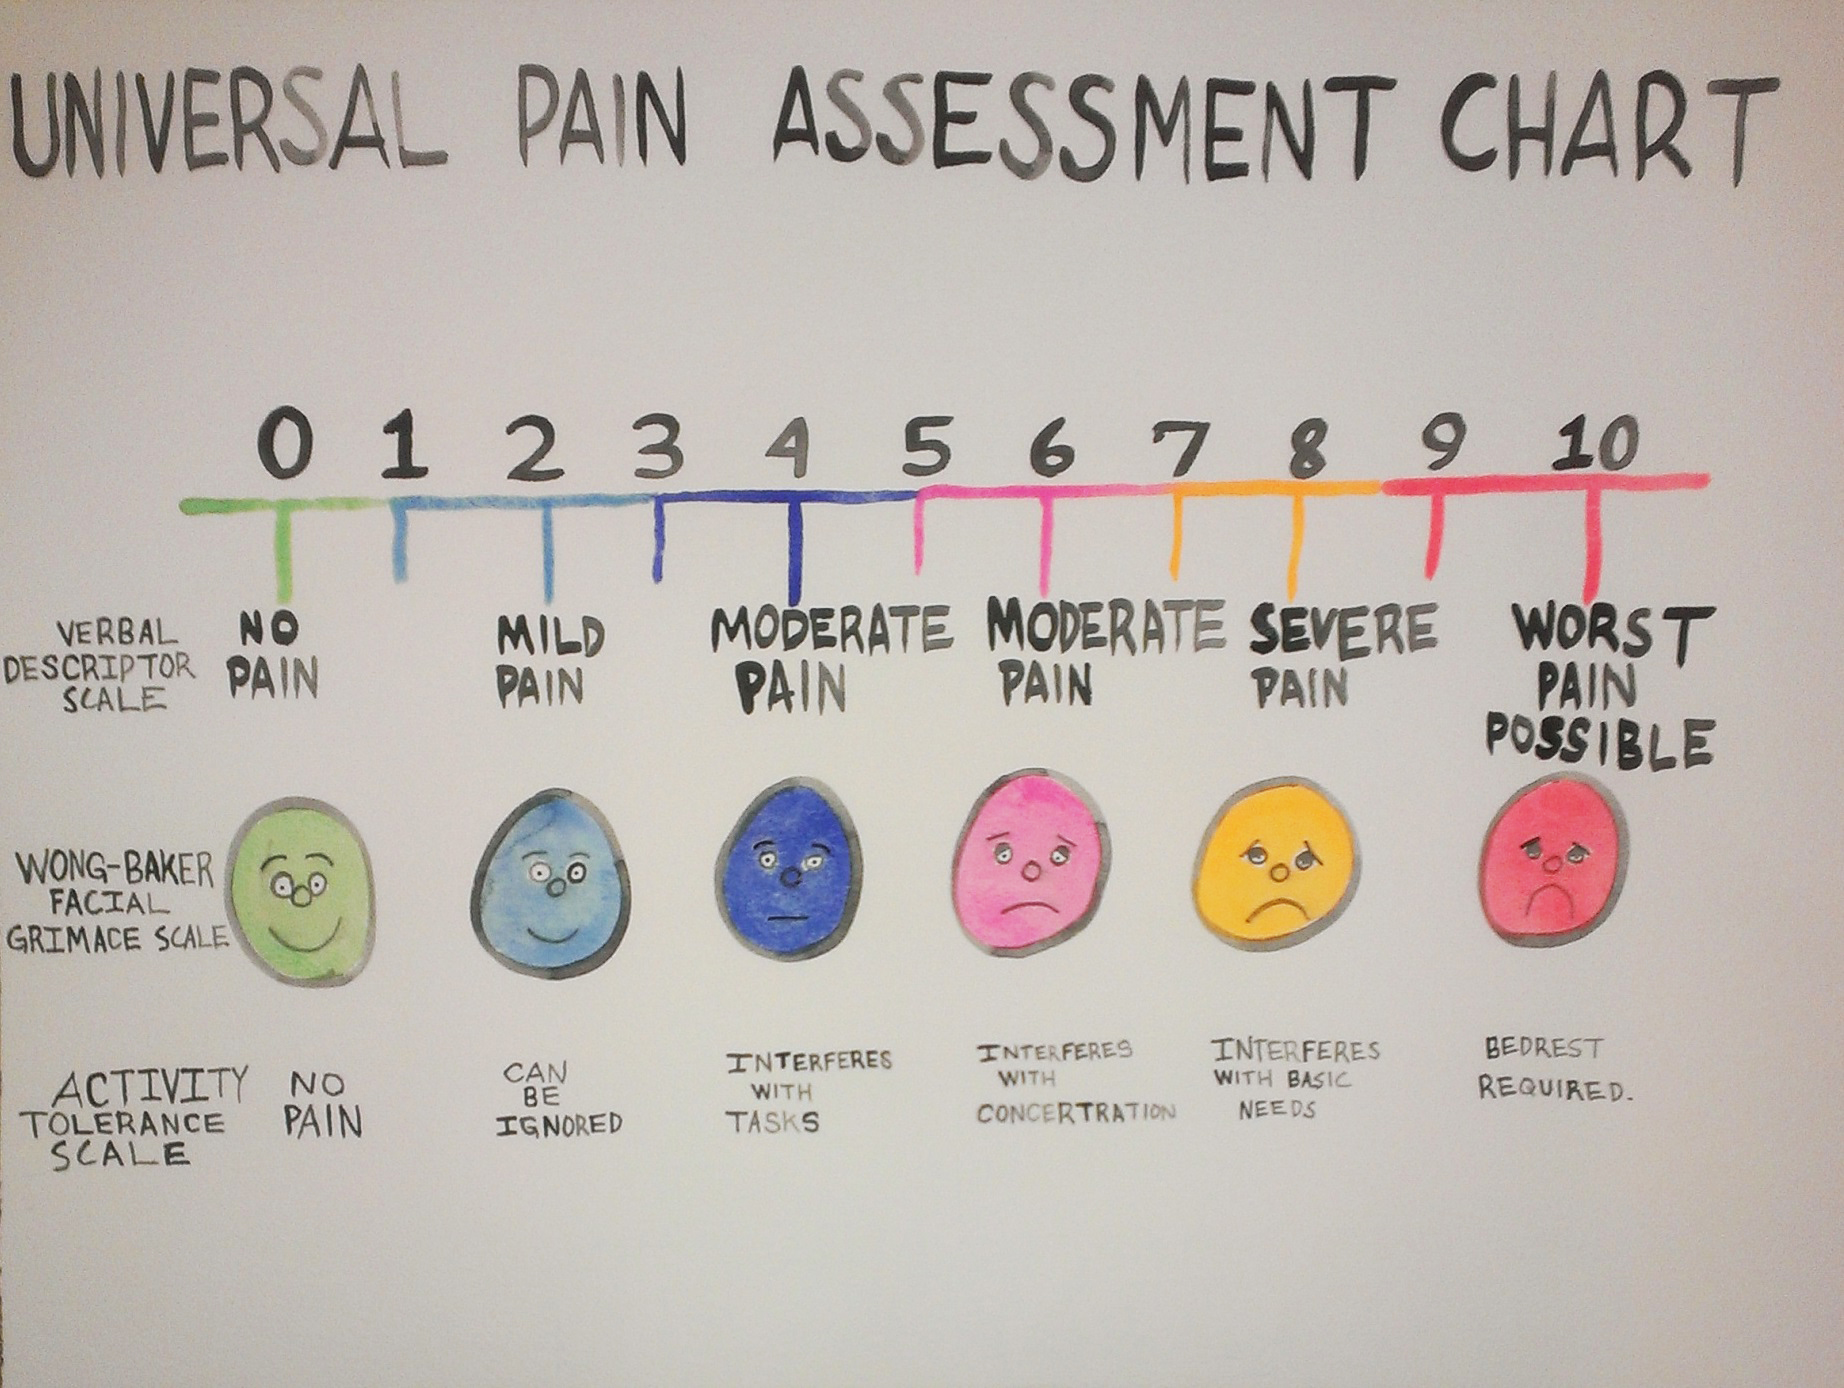   universal pain assessment chart   watercolor on paper  18" x 24"  2013 